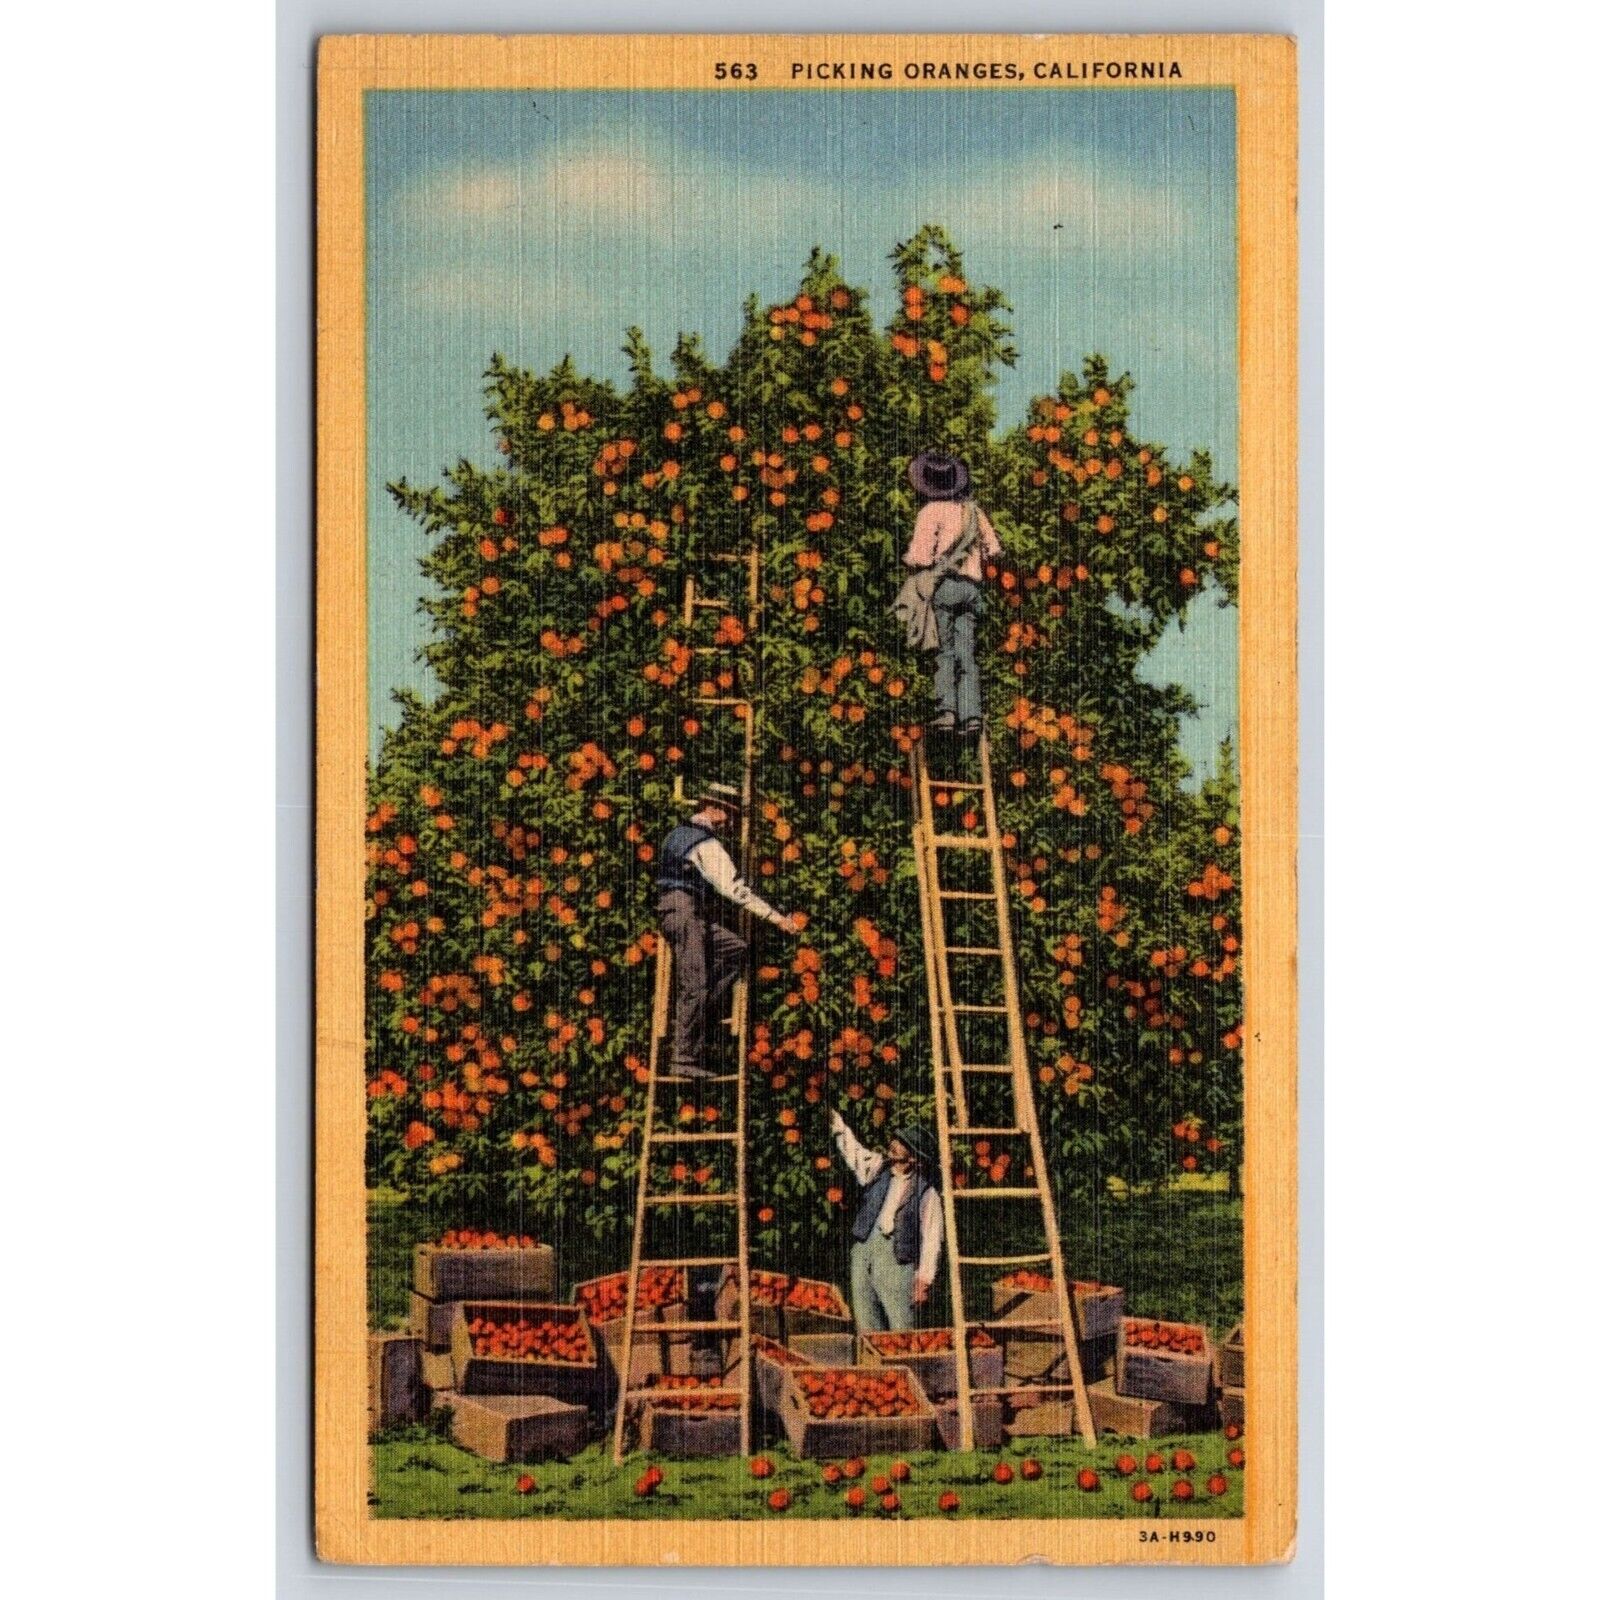 Vintage Postcard 1950s Picking Oranges California Orchard Farming Agriculture